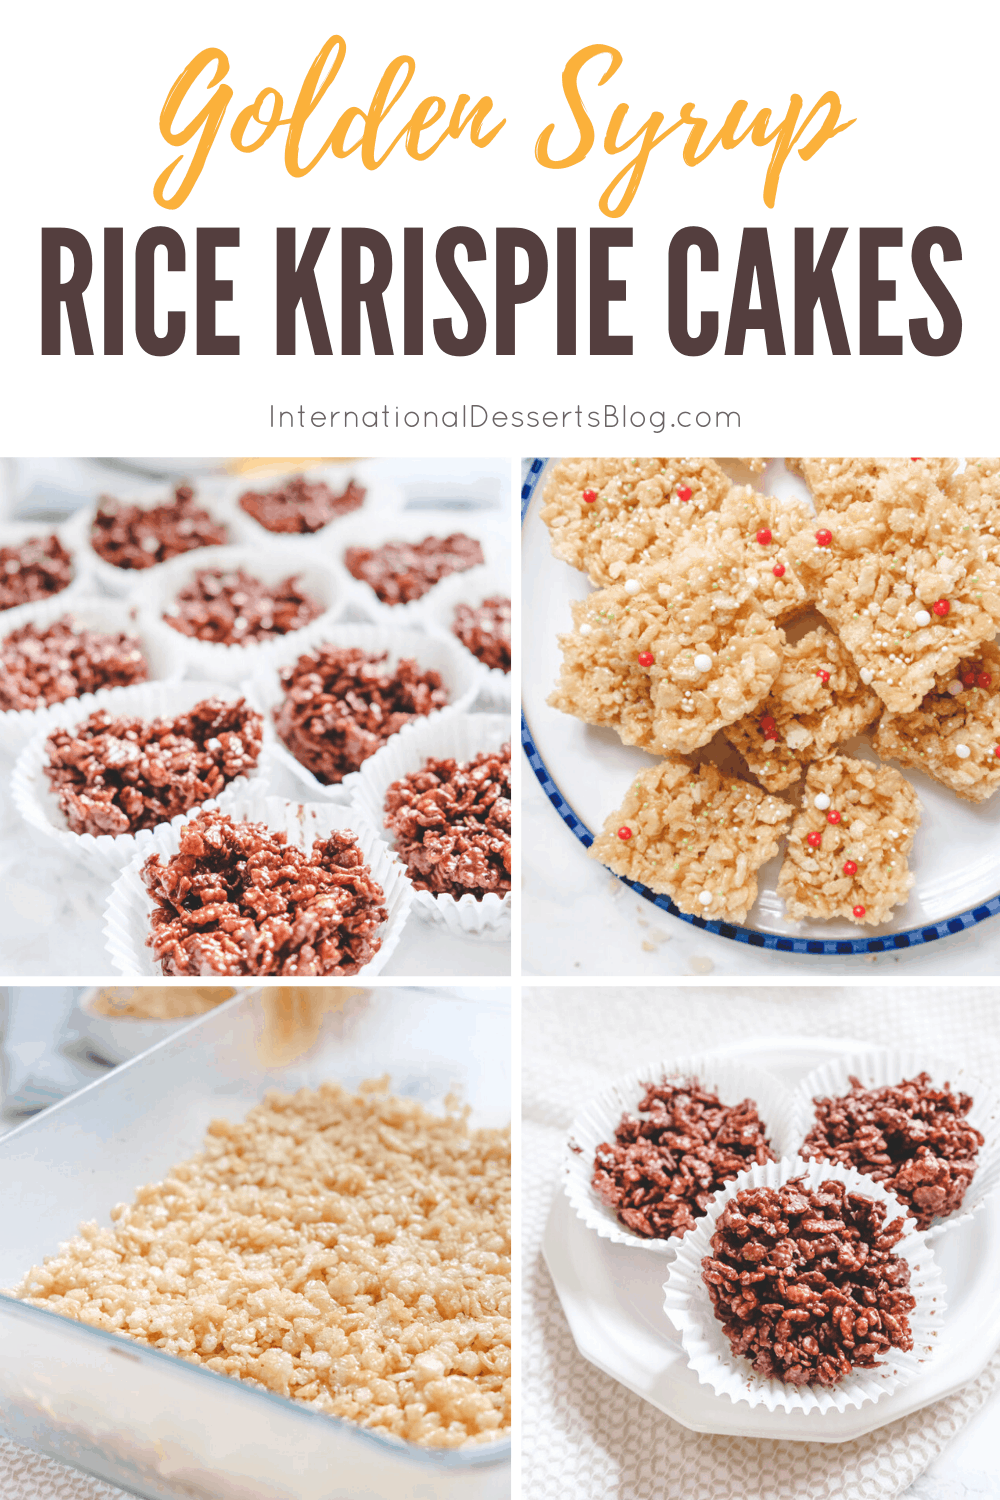 Easy Rice Krispie Cakes with Golden Syrup - International Desserts Blog